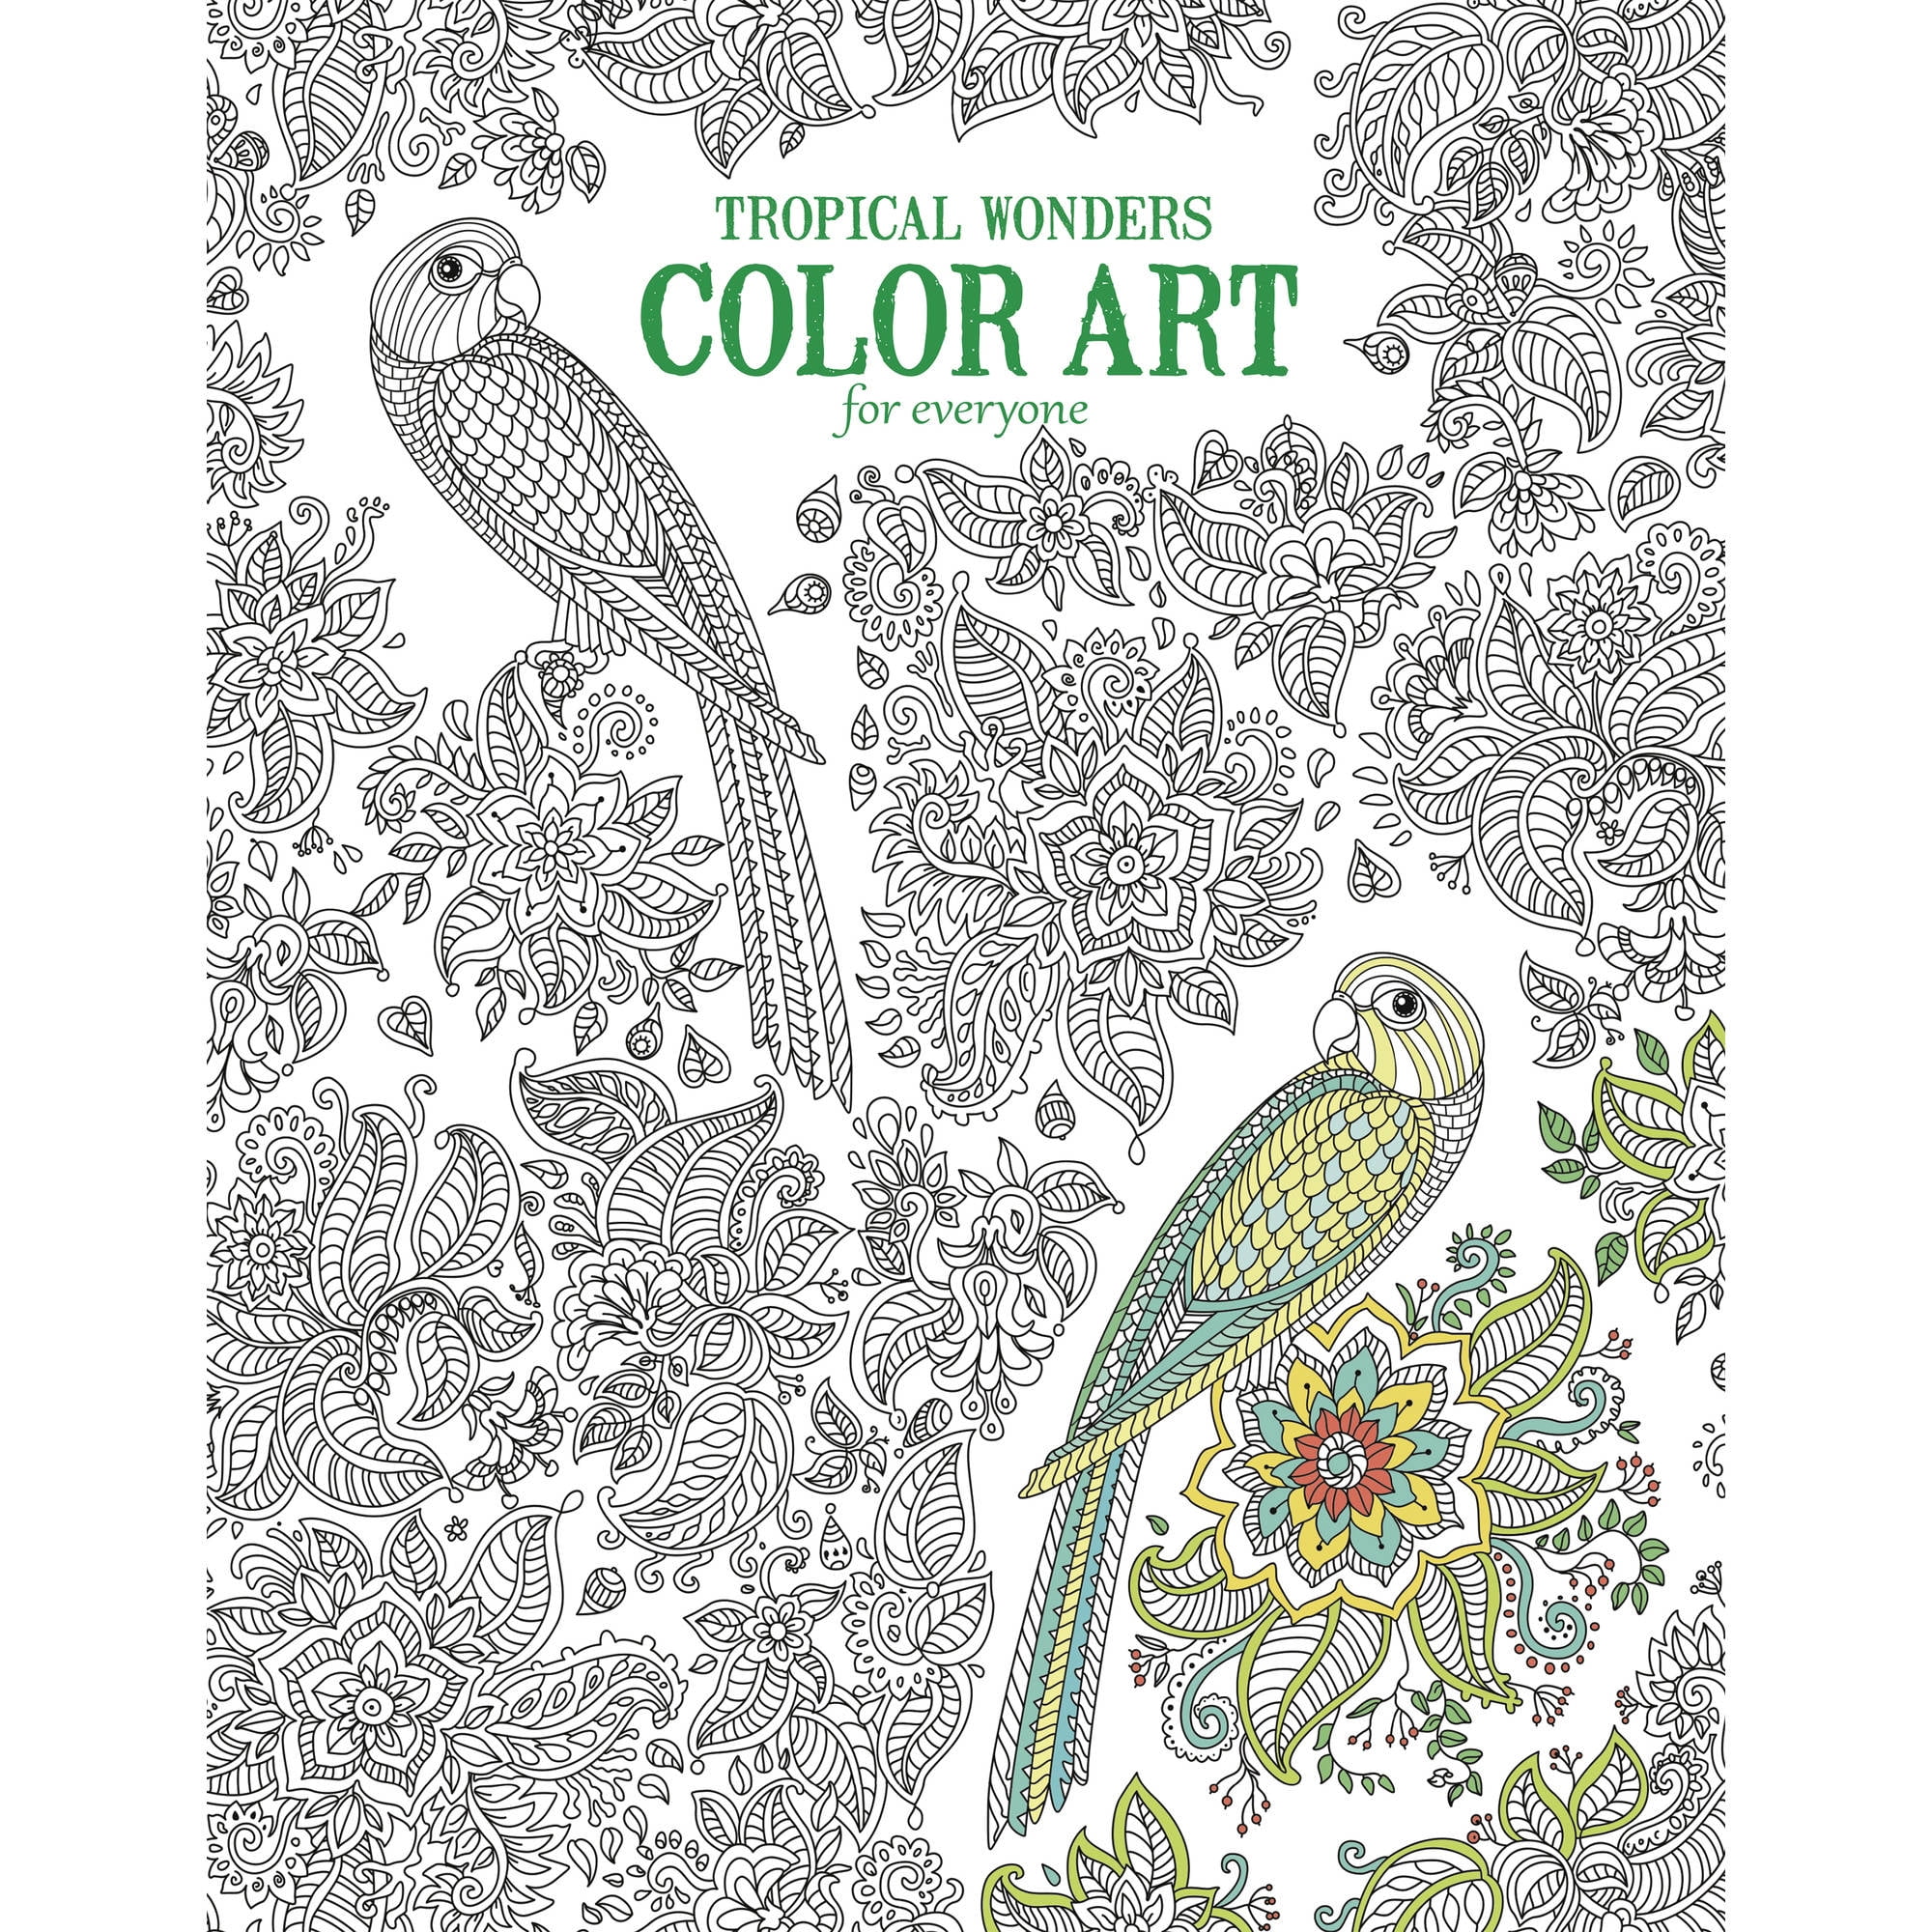 Novatron Color Art for Everyone Tropical Wonders Adult Coloring Book, 1